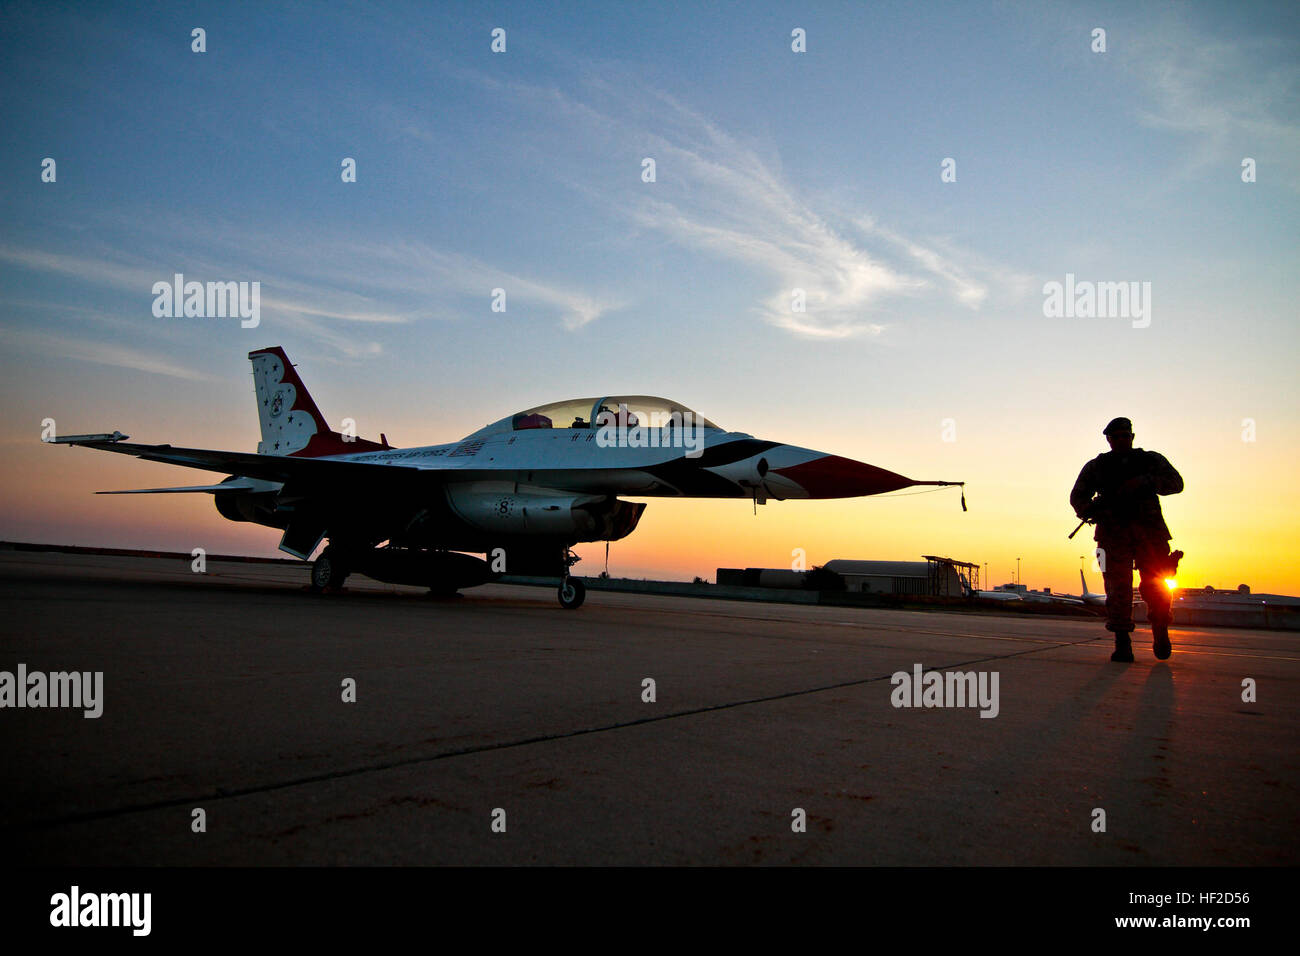 U.S. Air Force Staff Sgt. Luis Rodriguez from the New Jersey Air National Guard's 177th Security Forces Squadron does an early morning walk-around of U.S. Air Force F-16D Fighting Falcon #8 from the Thunderbirds Demonstration Team at Atlantic City Air National Guard Base, N.J., Aug. 11, 2014. The Thunderbirds are performing in N.J. for the Atlantic City 'Thunder Over the Boardwalk Airshow' Aug. 13.  (U.S. Air National Guard photo by Tech. Sgt. Matt Hecht/Released) Thunderbird at sunrise 140811-Z-NI803-022 Stock Photo